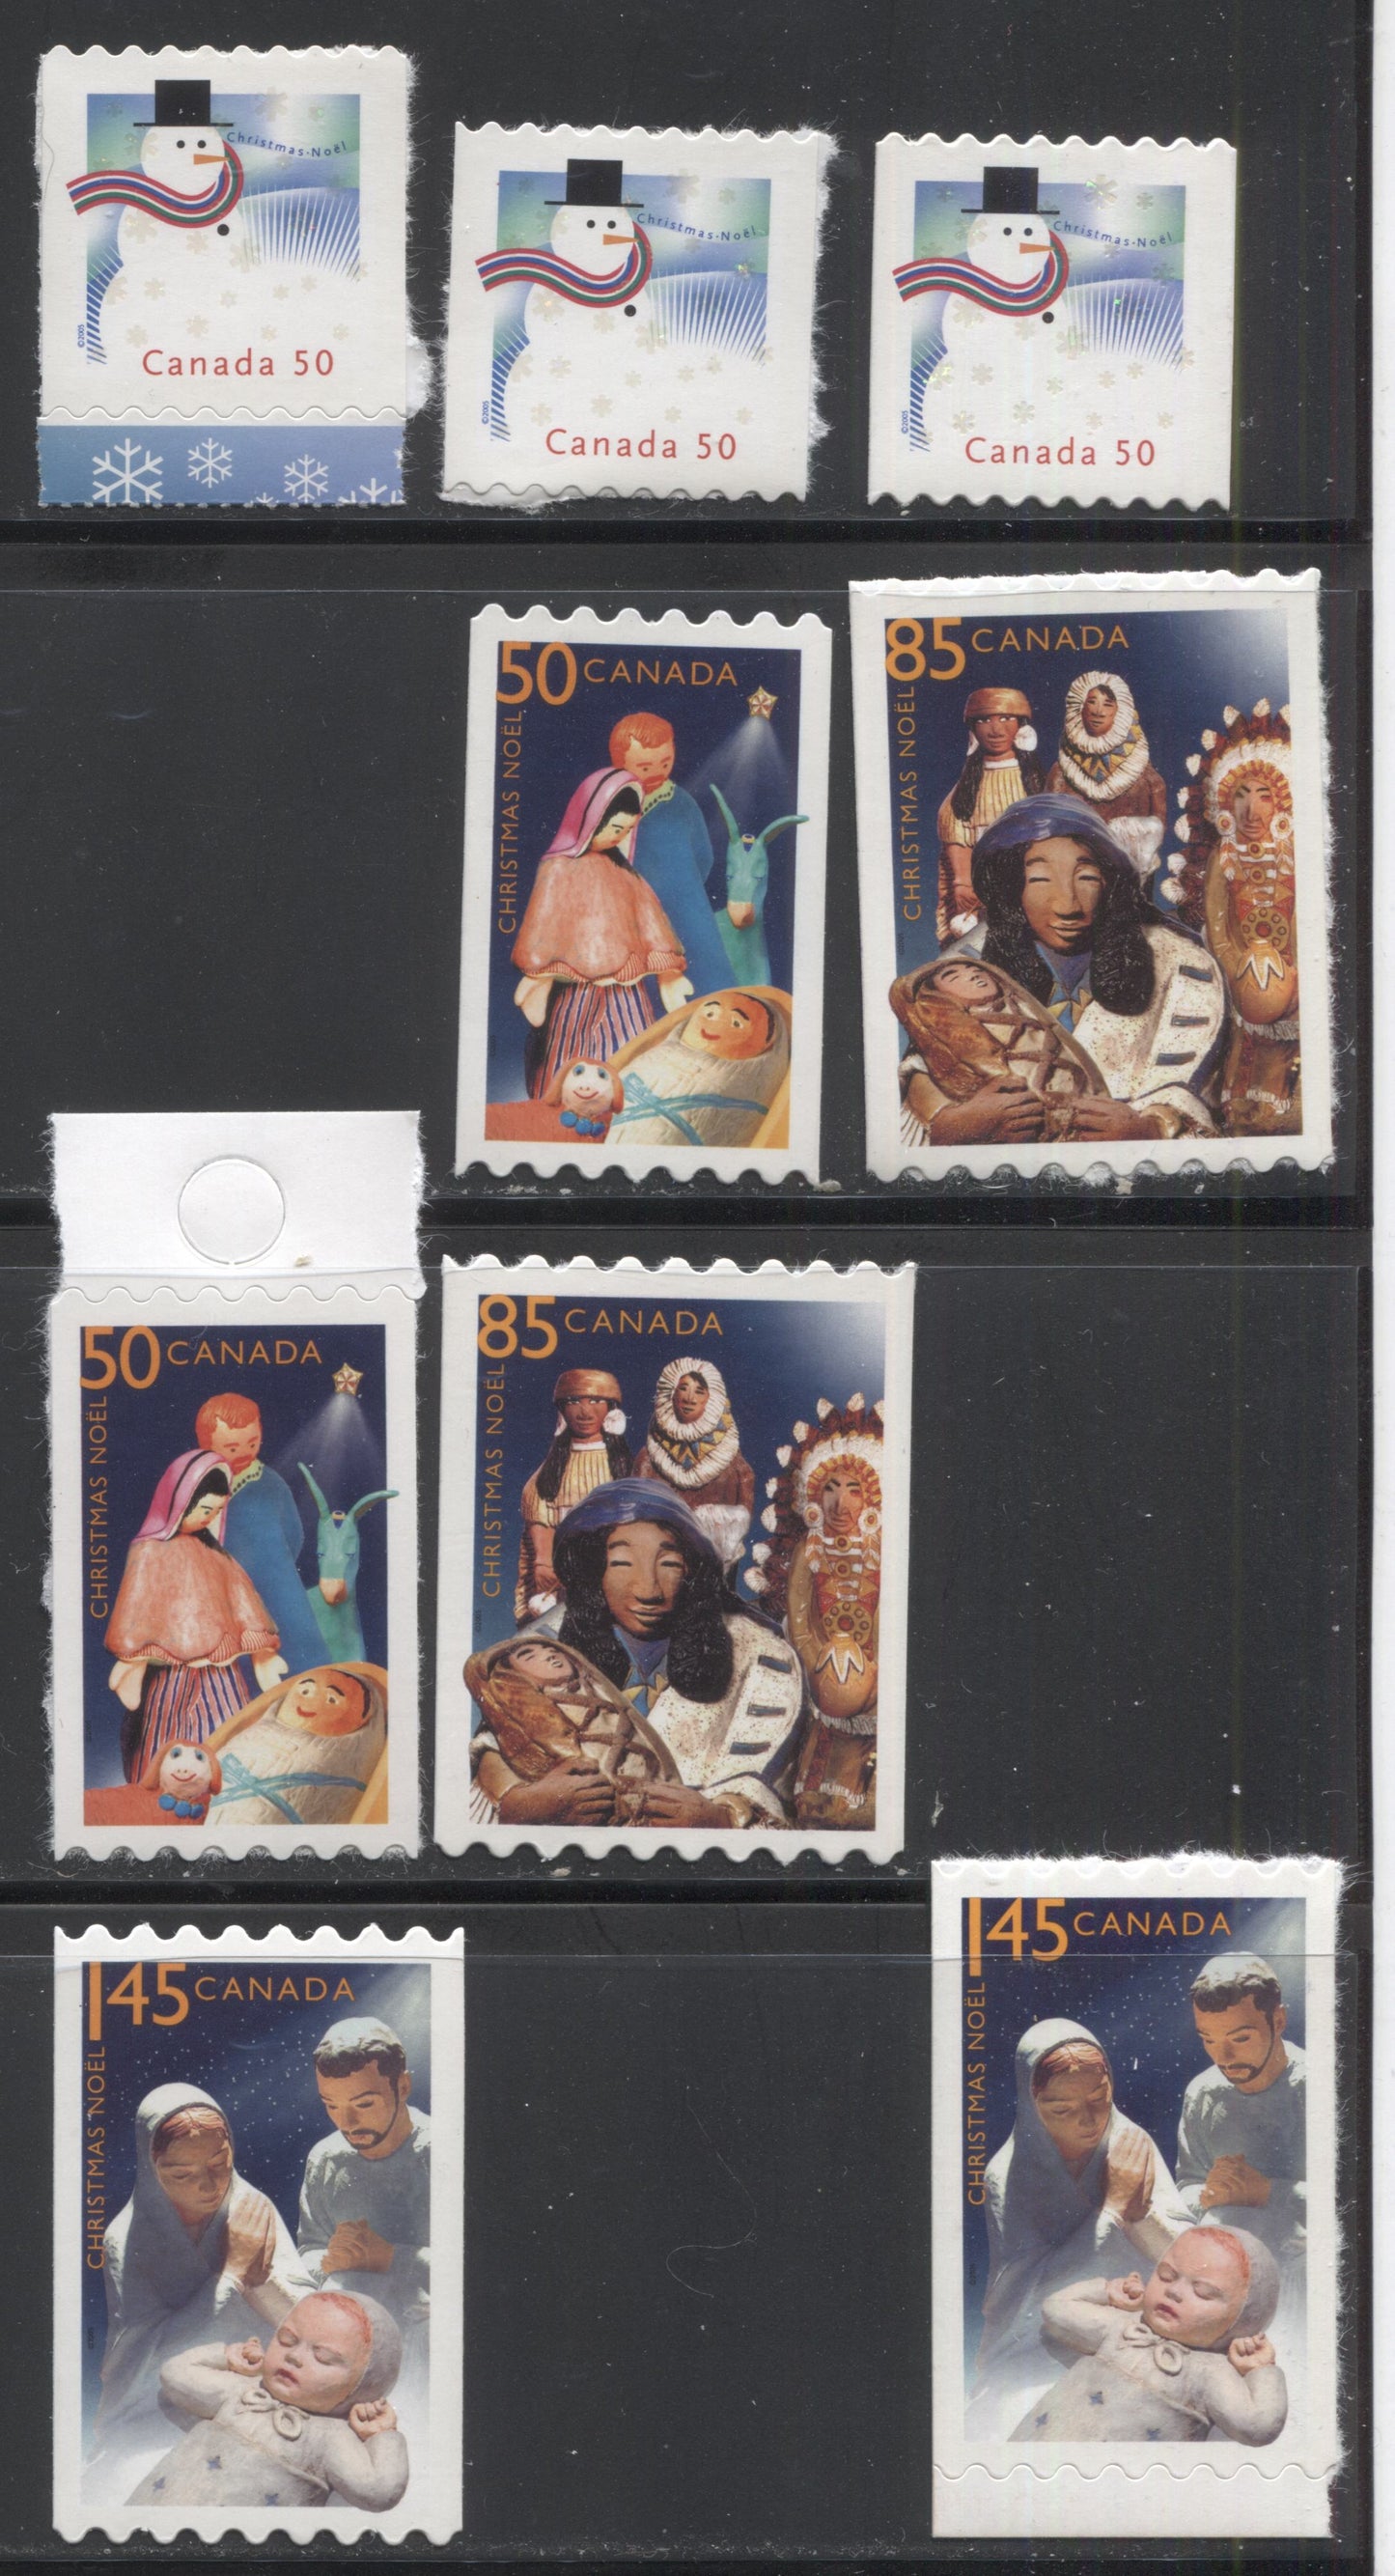 Lot 235 Canada #2124-2127 2005 Christmas Issue, A VFNH Complete Set of the Booklet Stamps and Die Cut to Shape Booket Stamps From the Quarterly Pack